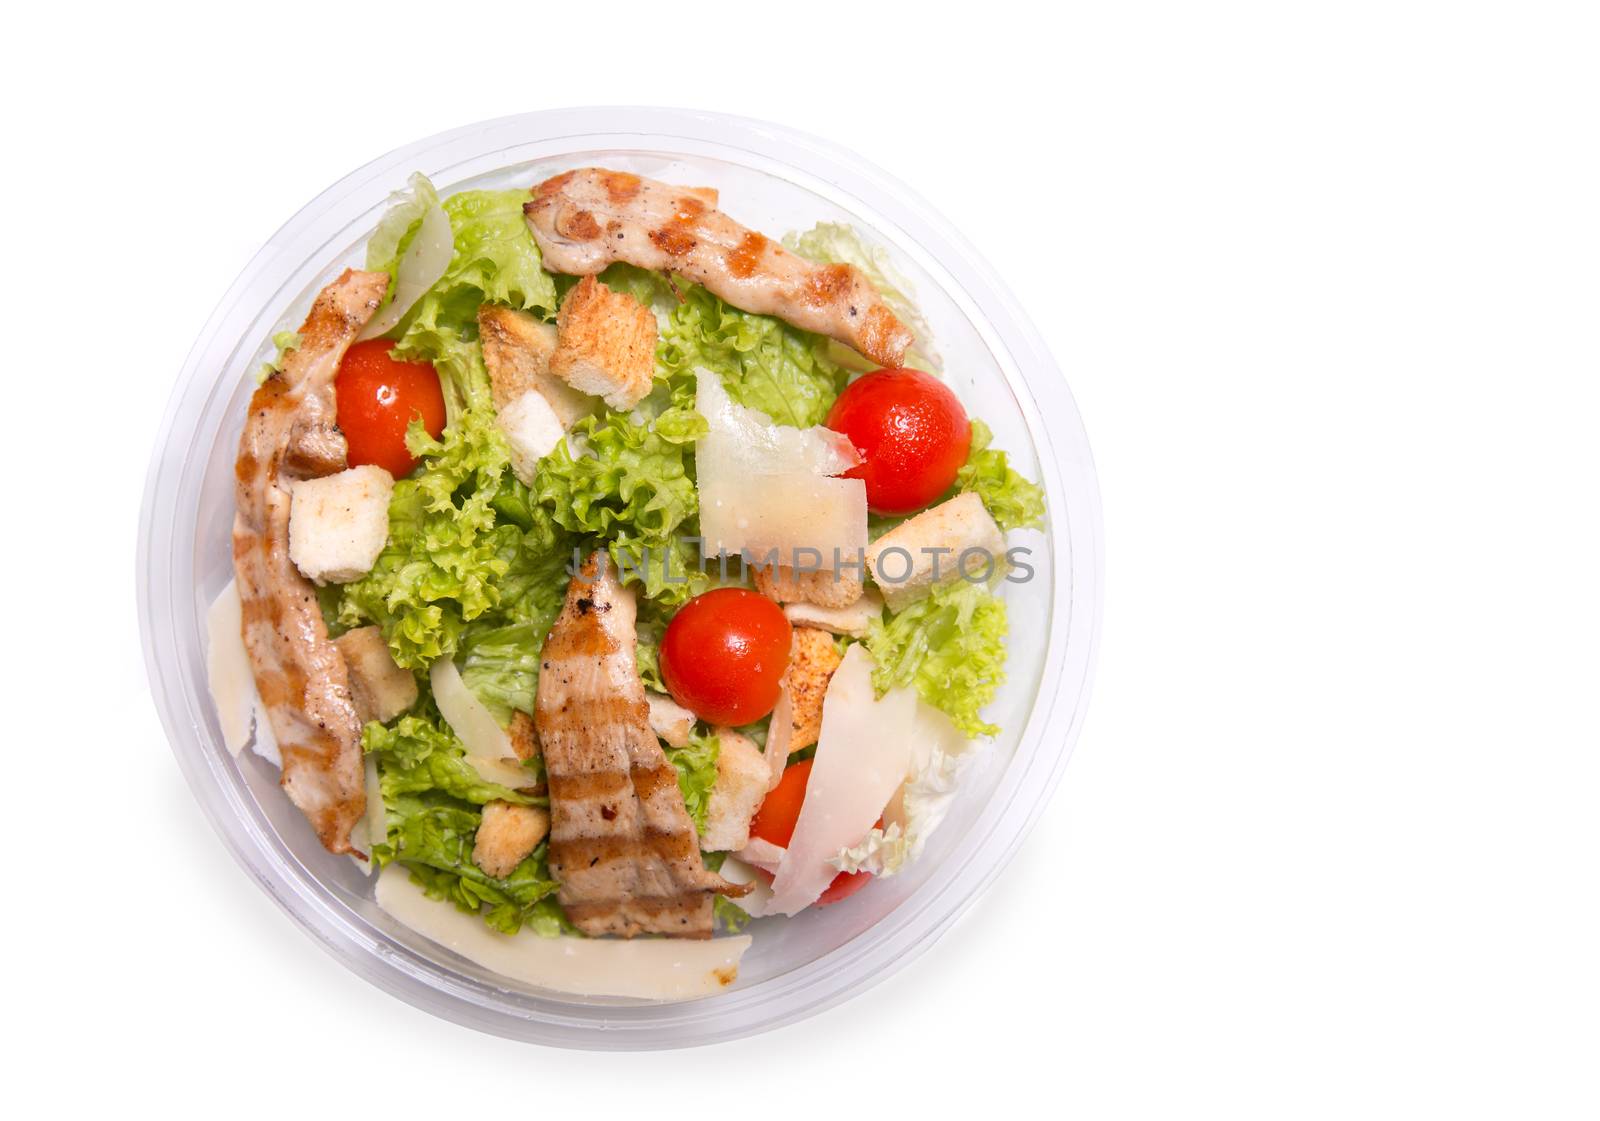 Caesar salad with grilled chicken meat, top view  by Elisanth